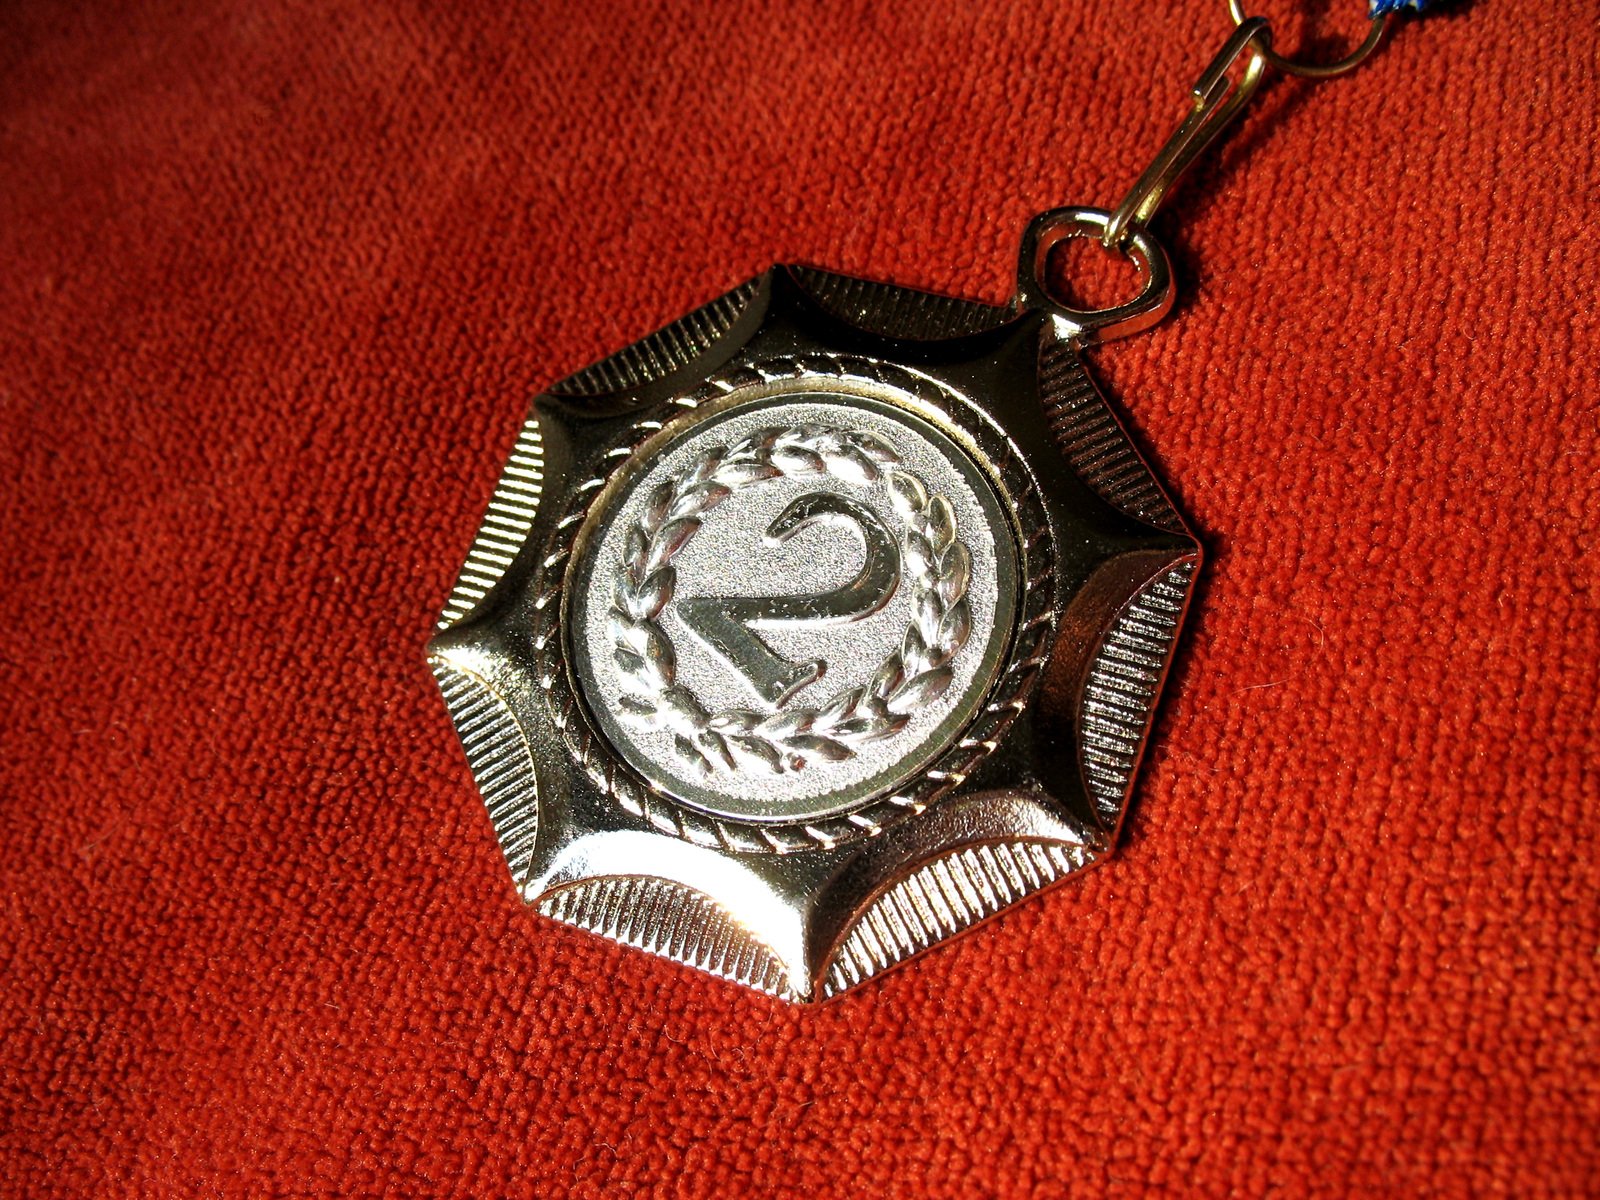 the emblem of a red cloth is hanging on a key chain